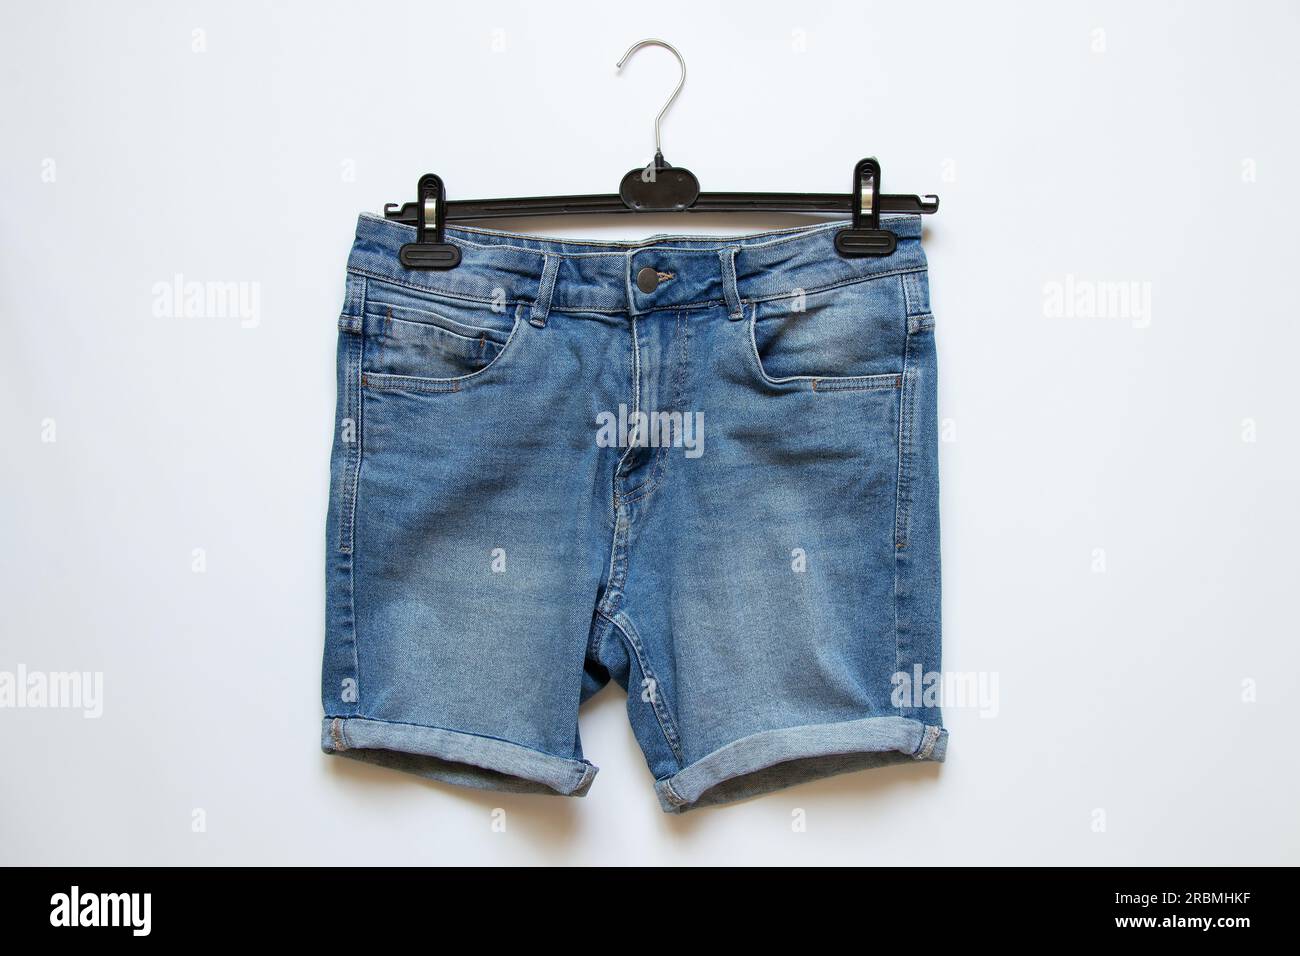 Denim men's shorts on a hanger on a white background, fashionable clothes Stock Photo